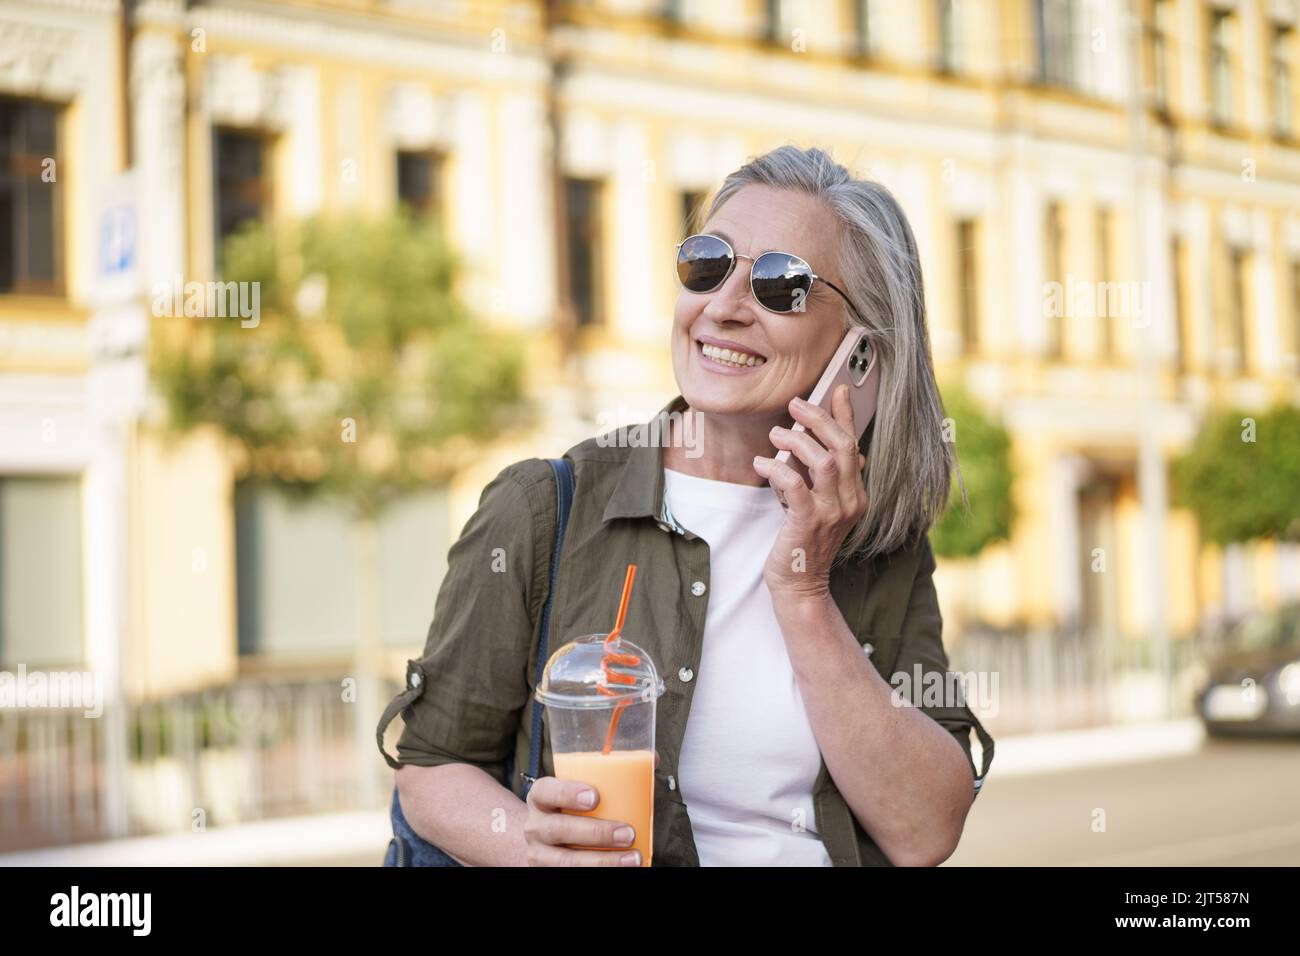 Answering phone call happy mature woman talking on the phone enjoying free time after work or traveling having juice in plastic cup on the go in city background. Enjoying life mature woman.  Stock Photo